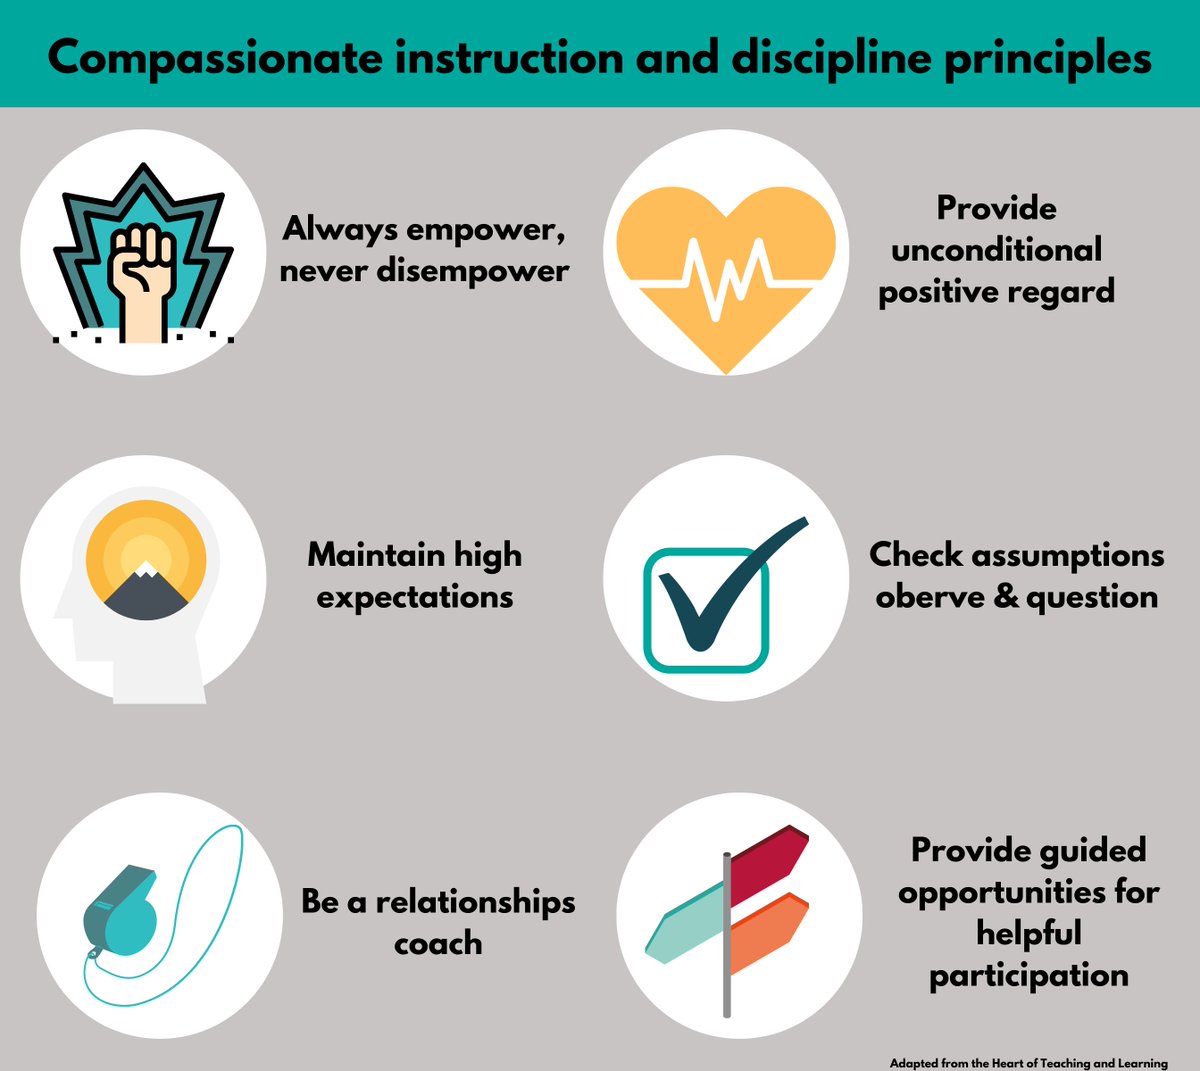 Here's another example of some of the graphic materials we're developing for THRIVE. This is aimed at relationship building in the classroom #relationshipbuilding #compassionatediscipline #traumainformed #ACEAware